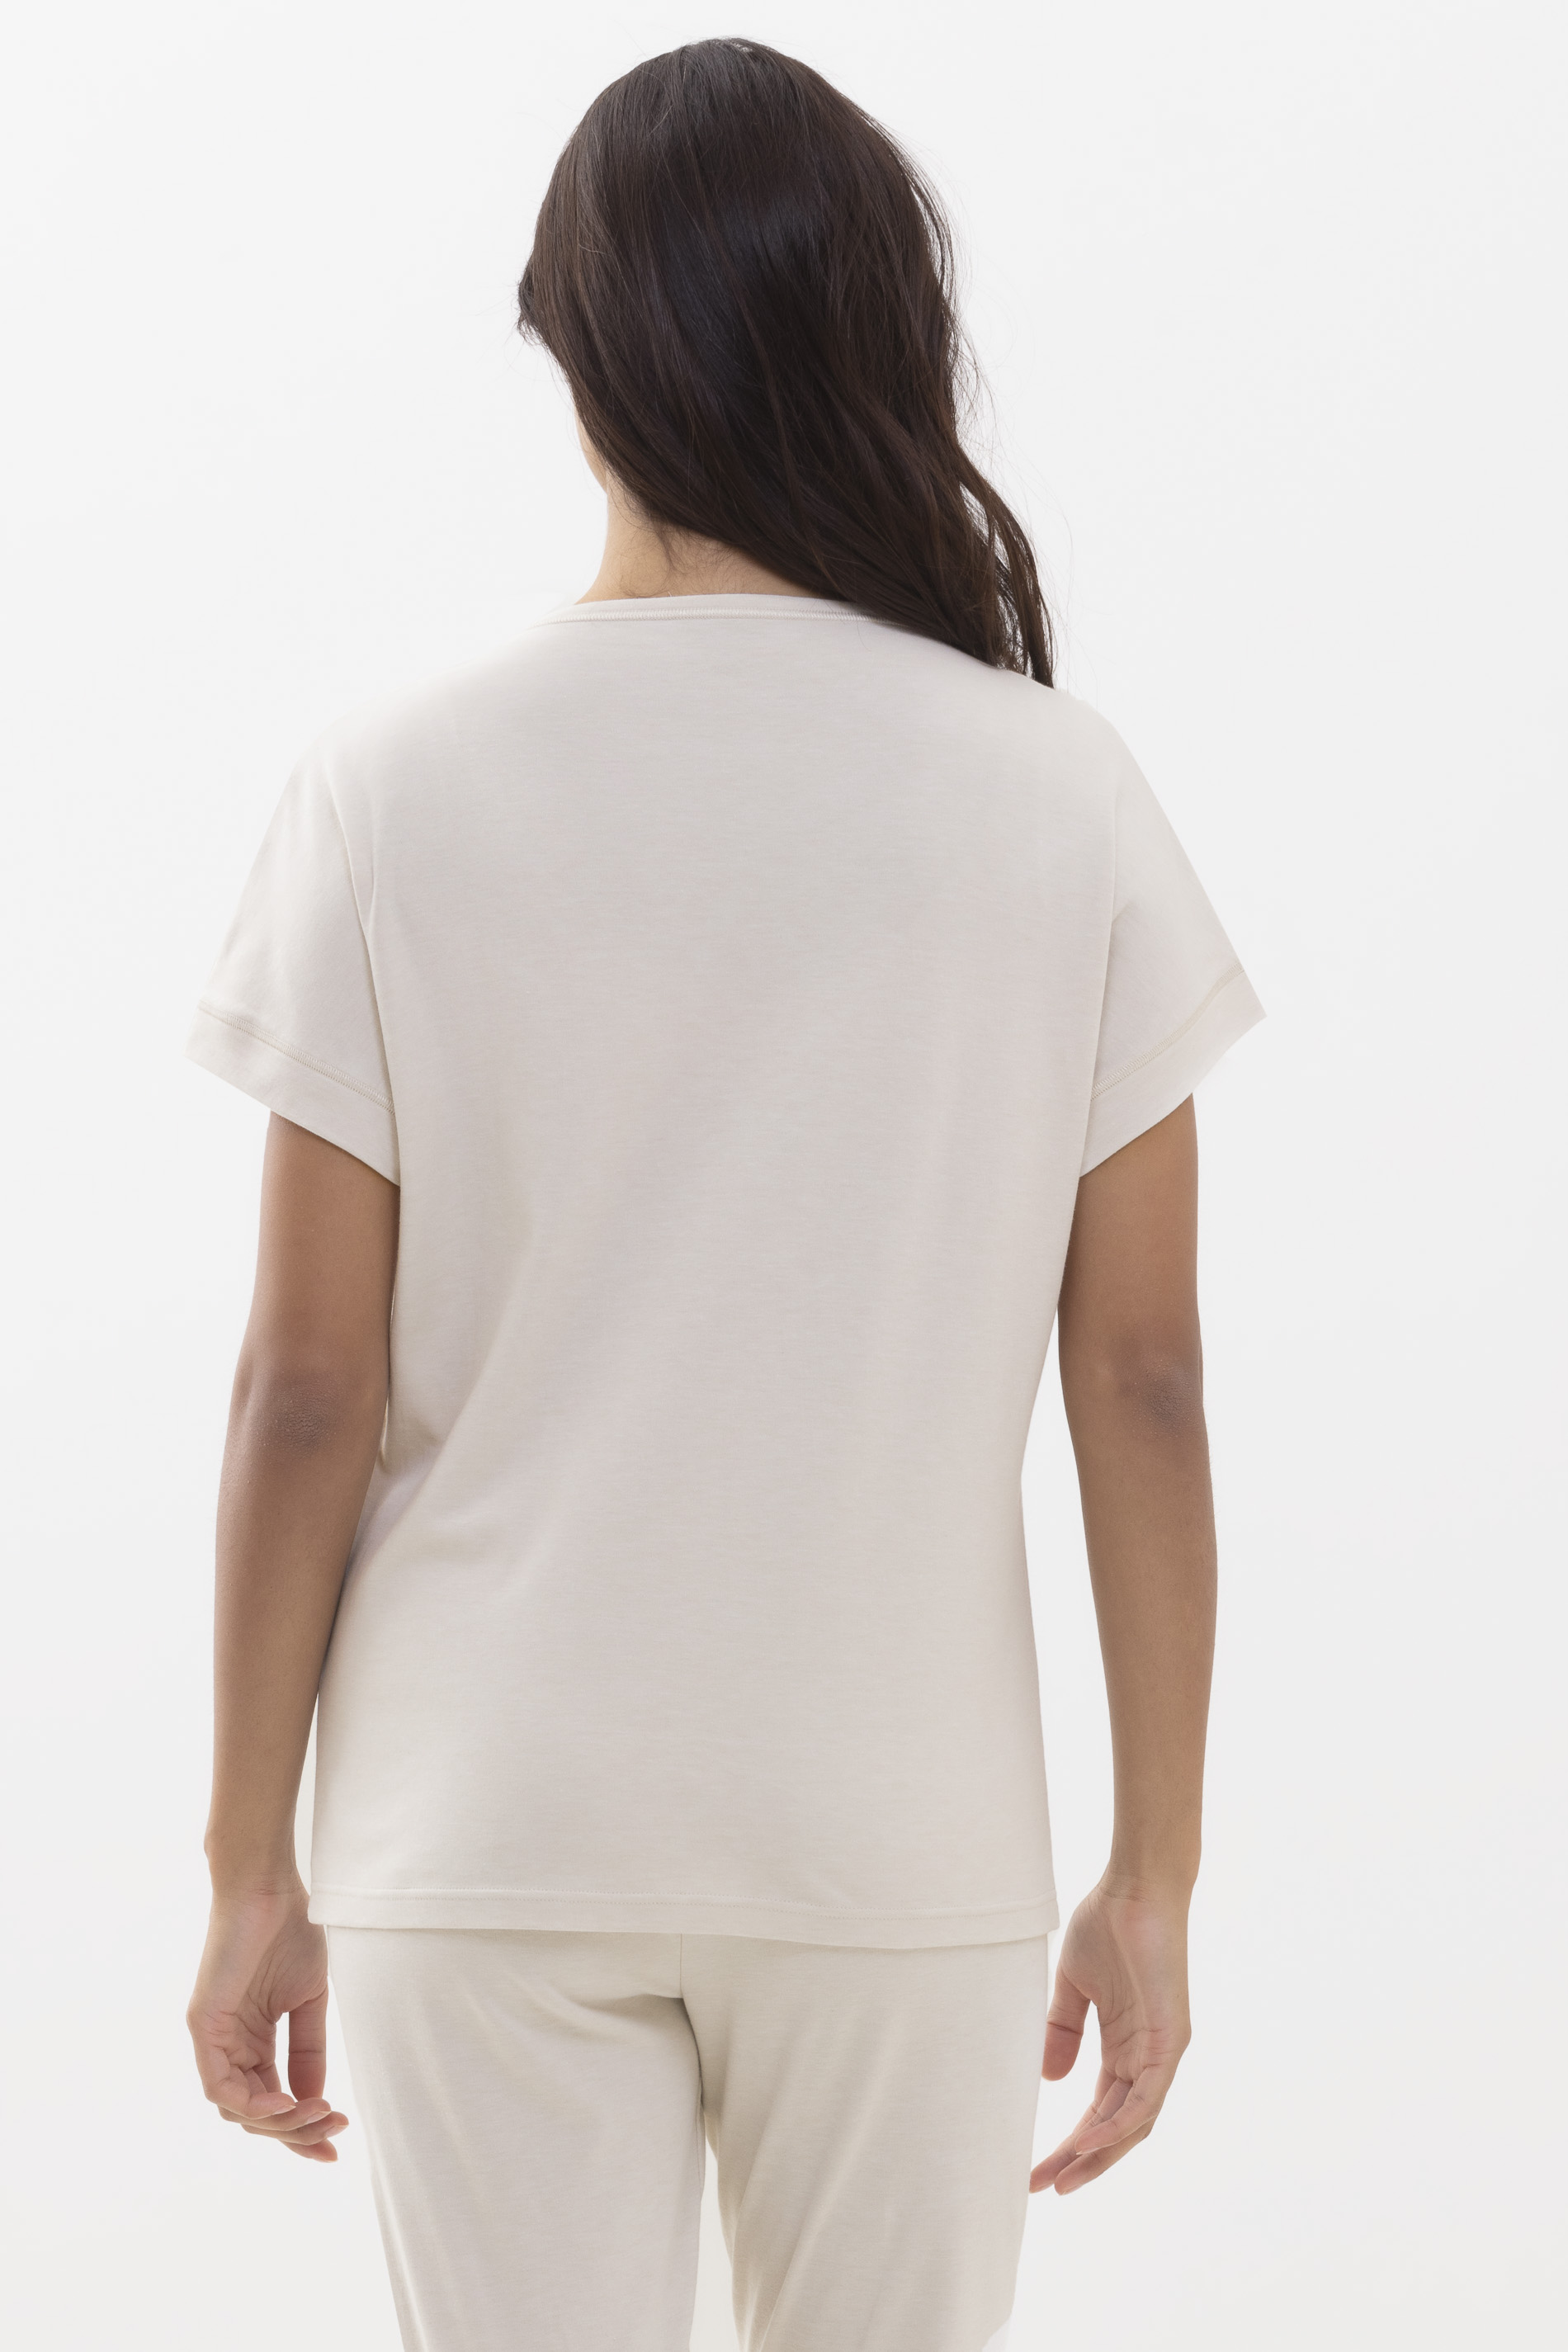 Shirt with half sleeves Natural Serie N8TEX 2.0 Rear View | mey®